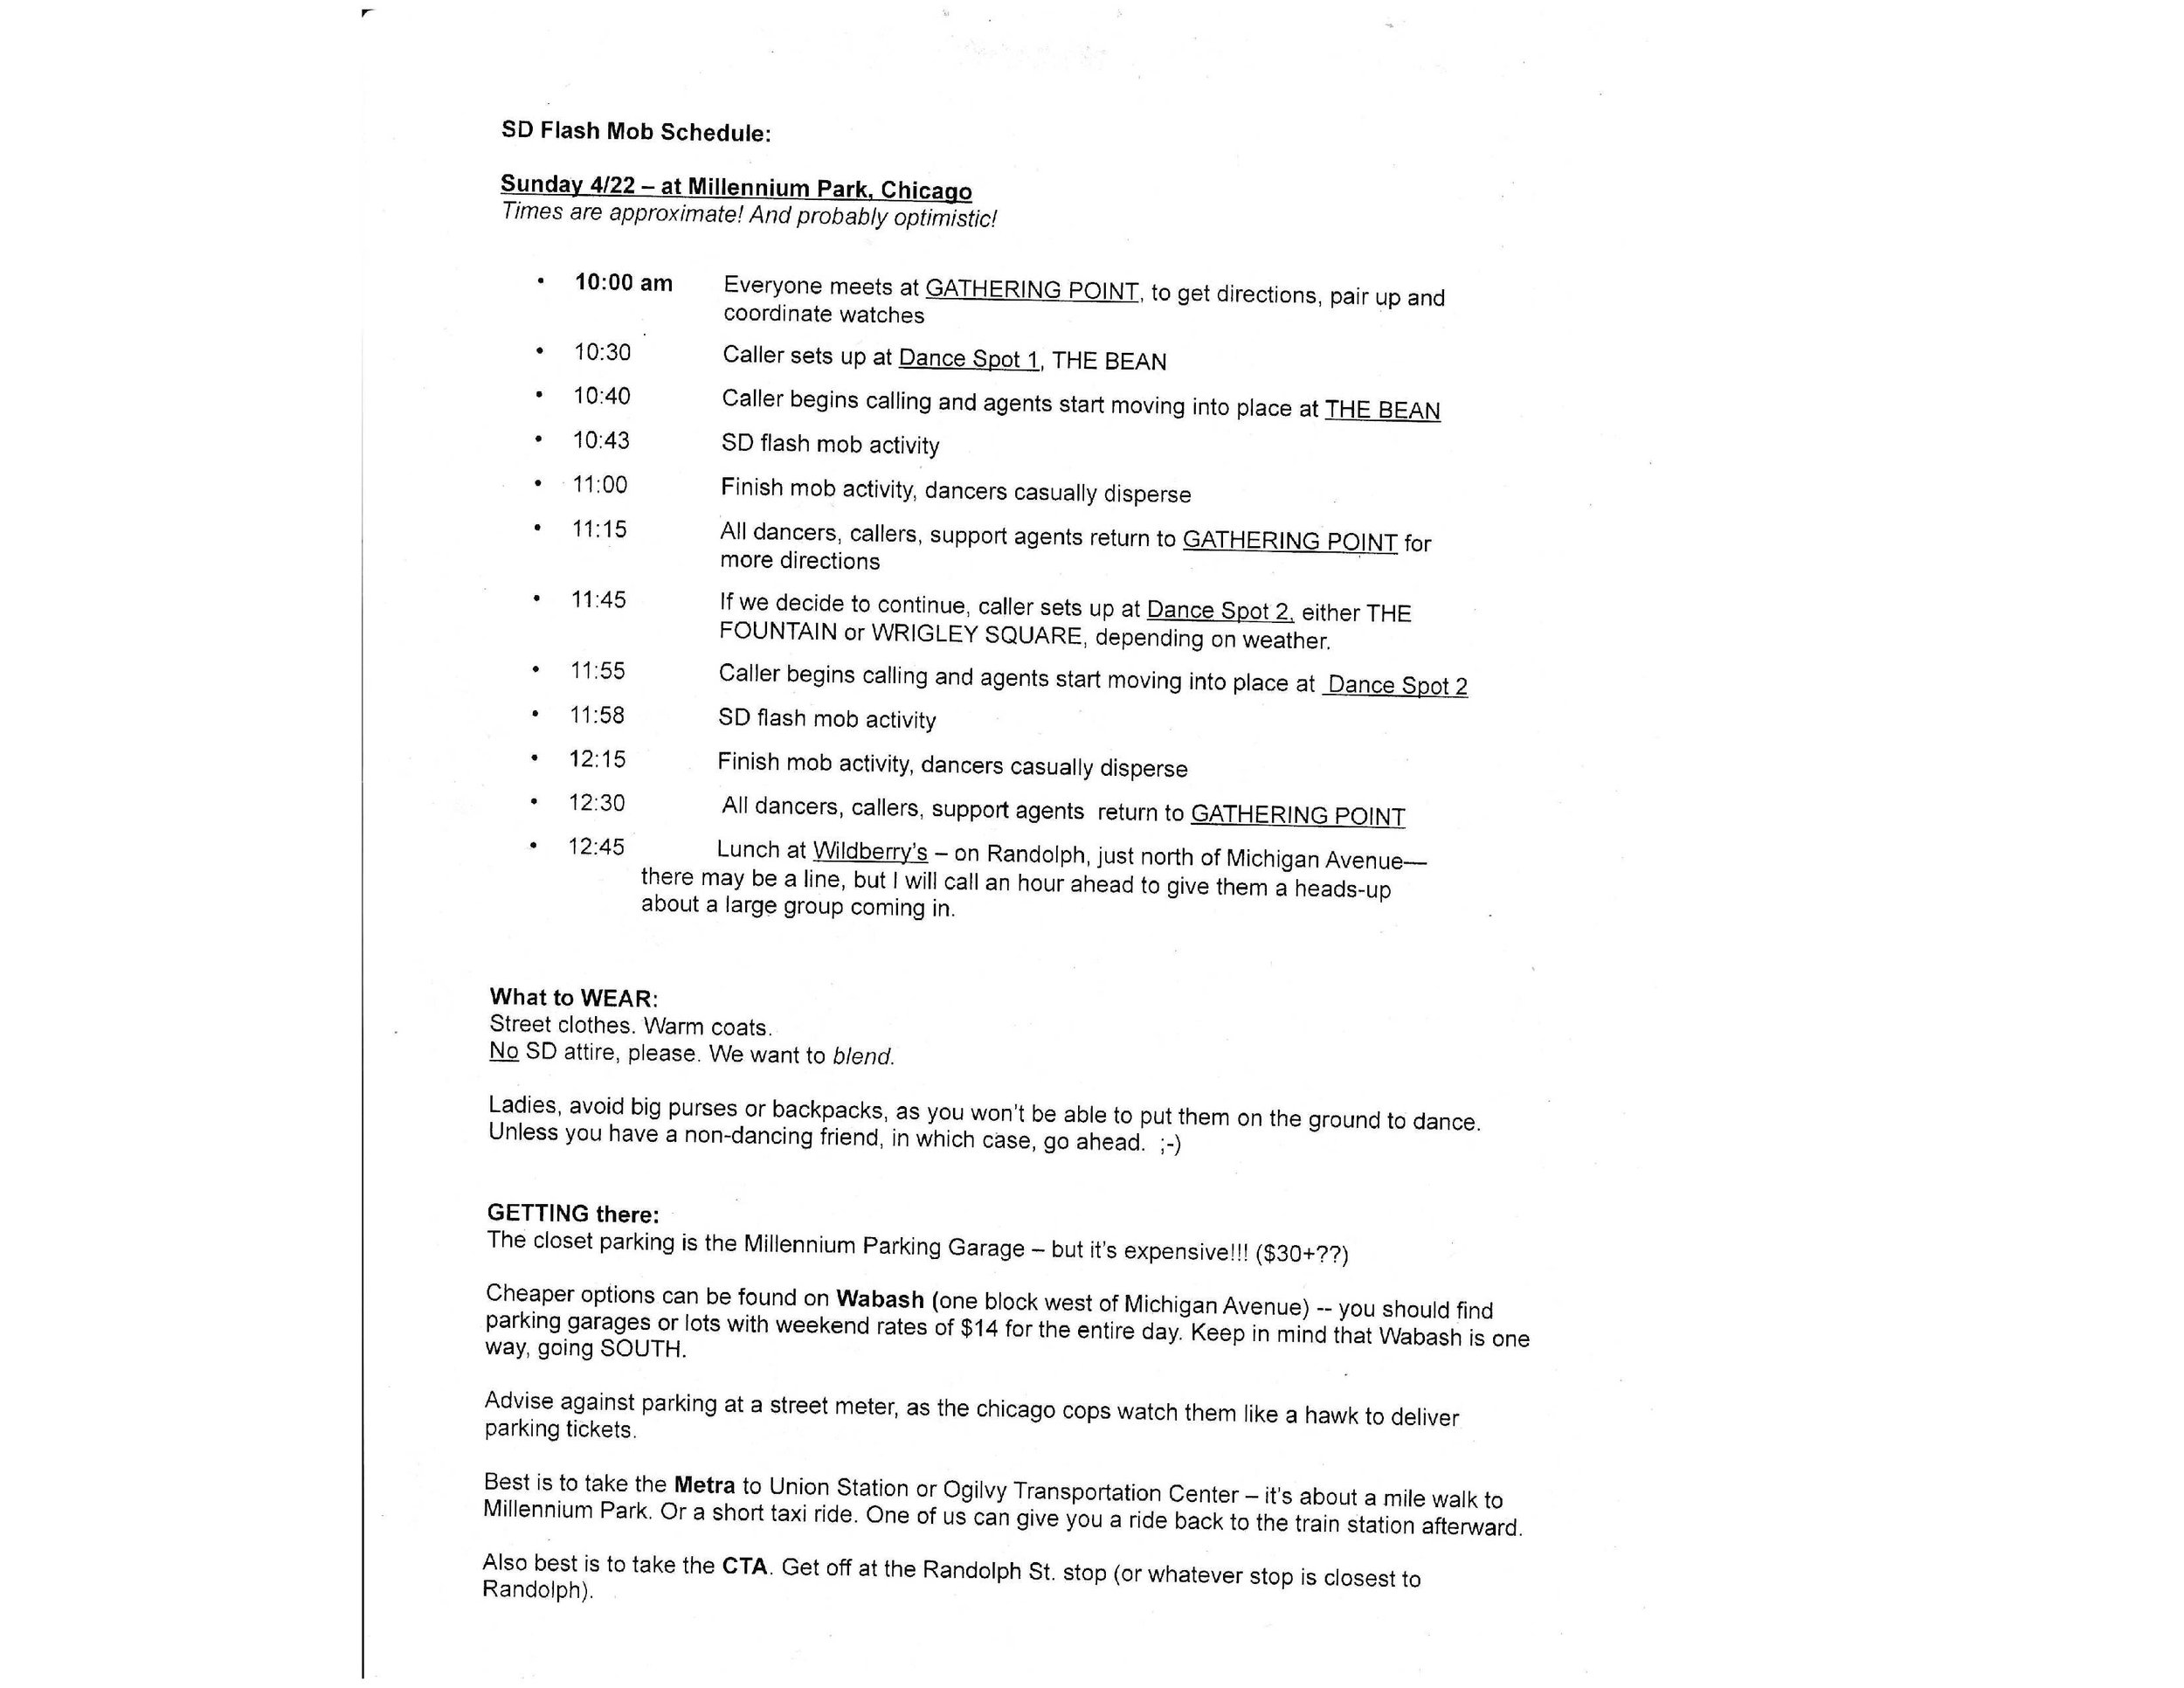 SD Flash Mob Flyer-Schedule 04-22-12 Page 2